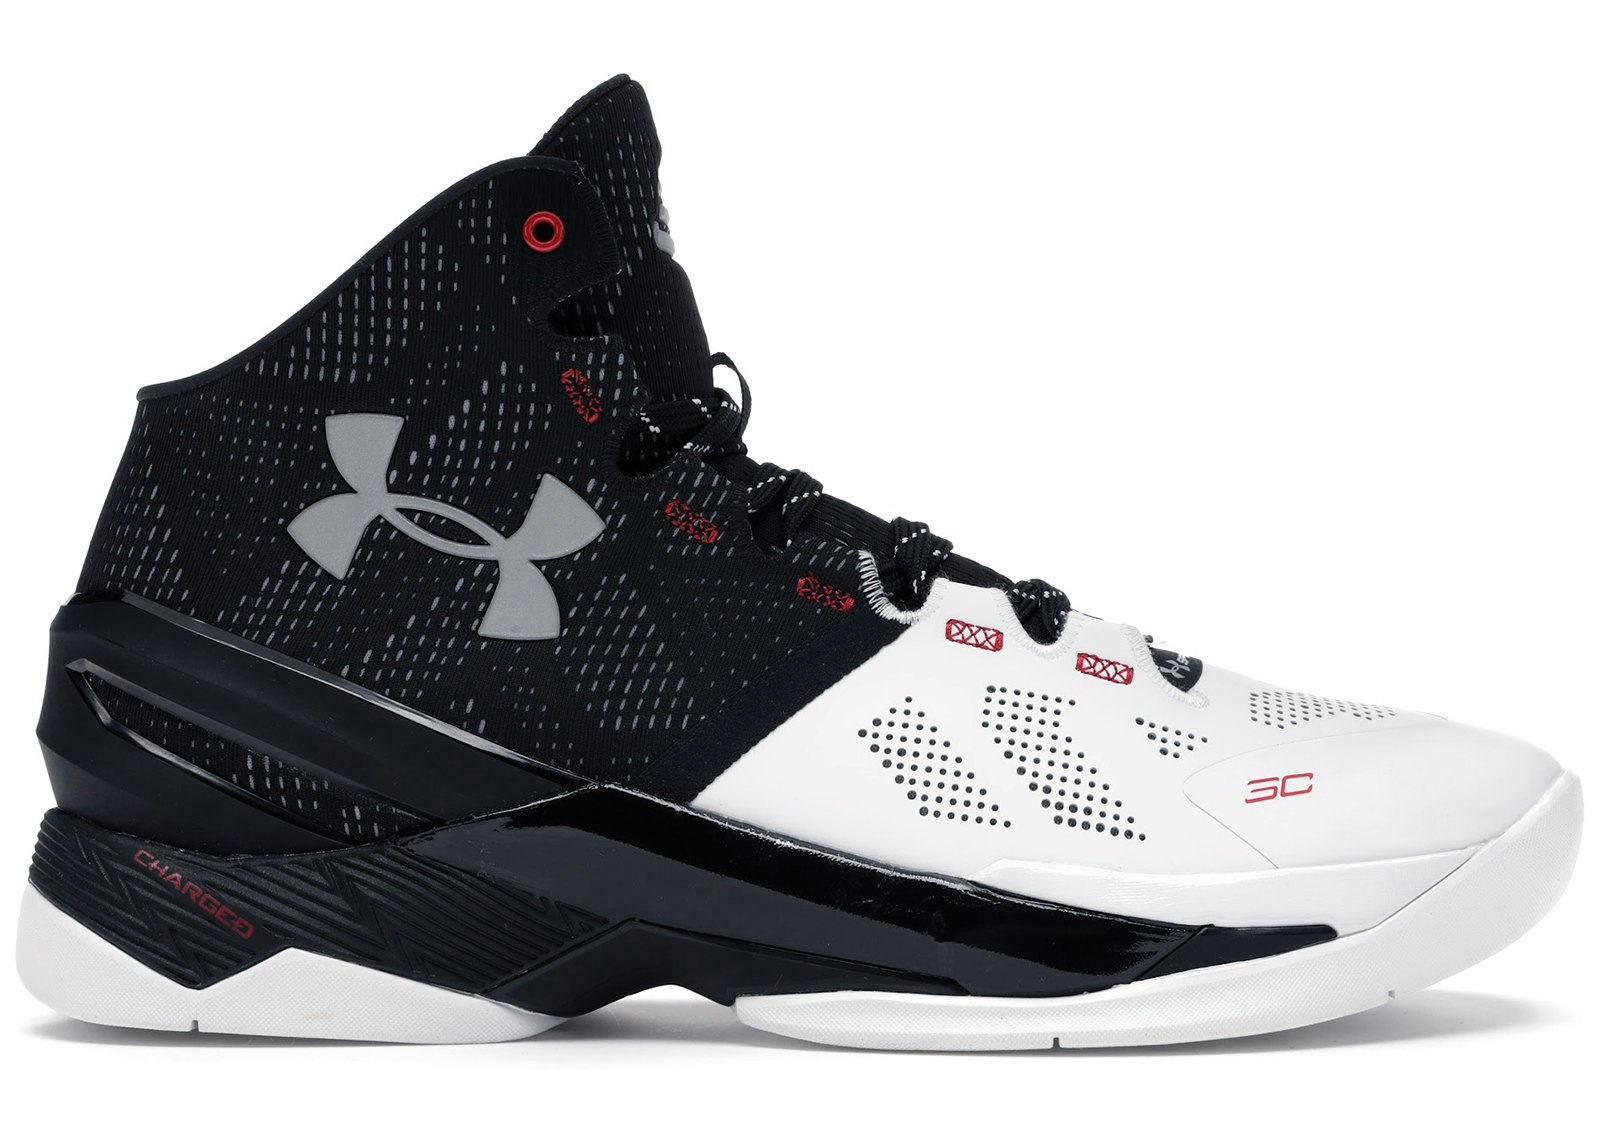 Under Armour Curry 2 Two suit and tie playoff black white one low 1